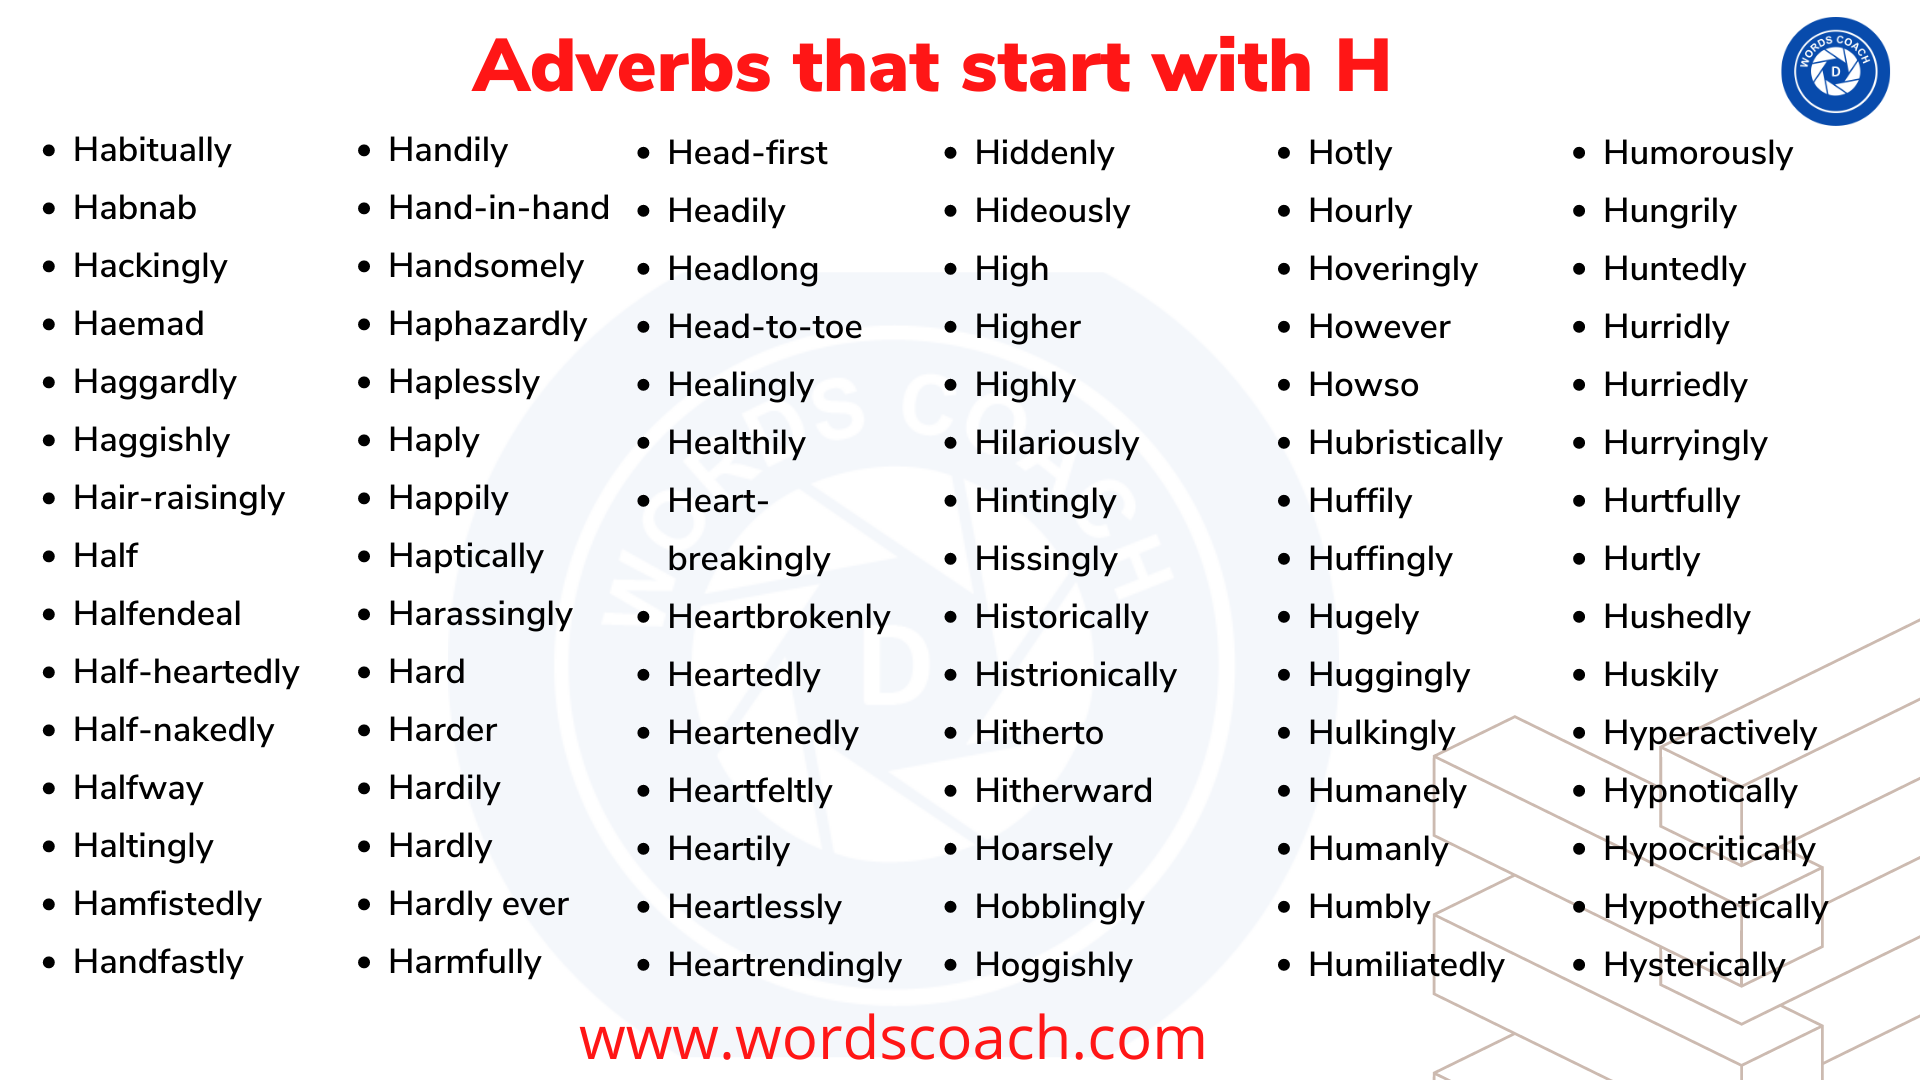 Adverbs that start with H - wordscoach.com